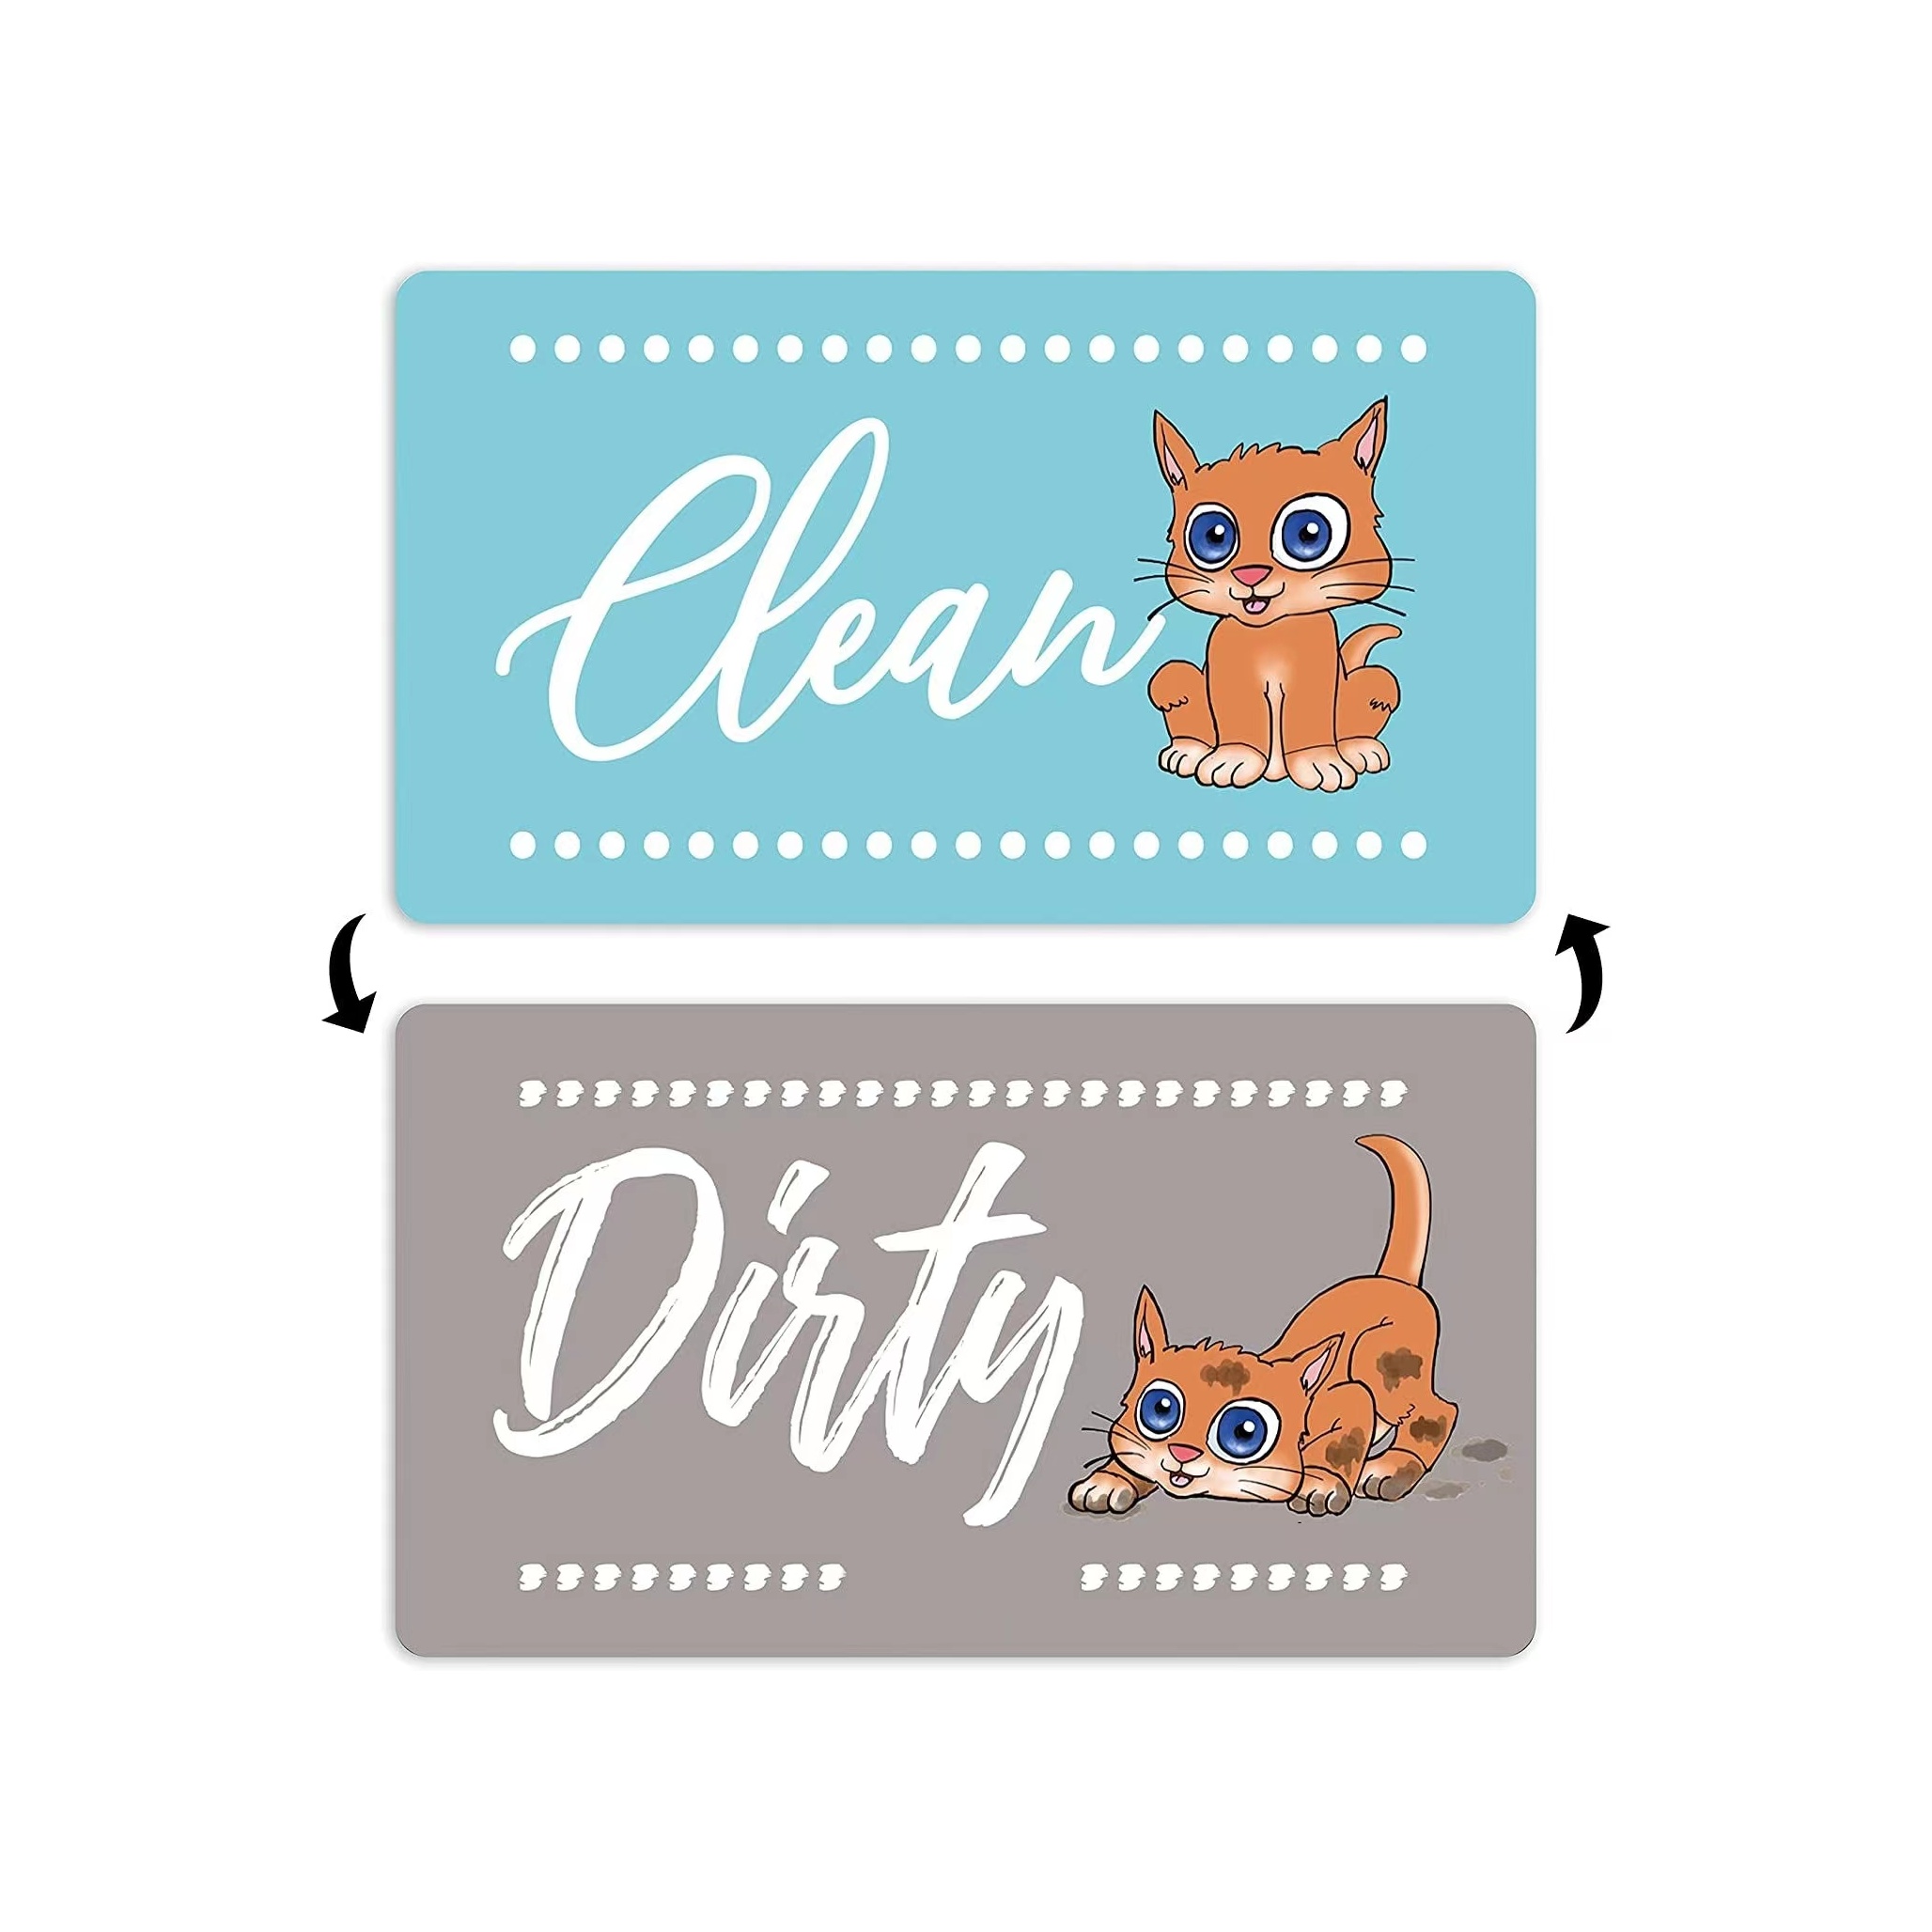 CONMOTO Dishwasher Magnet Clean Dirty Sign,Clean Dirty Magnet for  Dishwasher,Kitchen Dishwasher Magnets Sign, No-Scratch Strong Magnets,  Dirty Clean